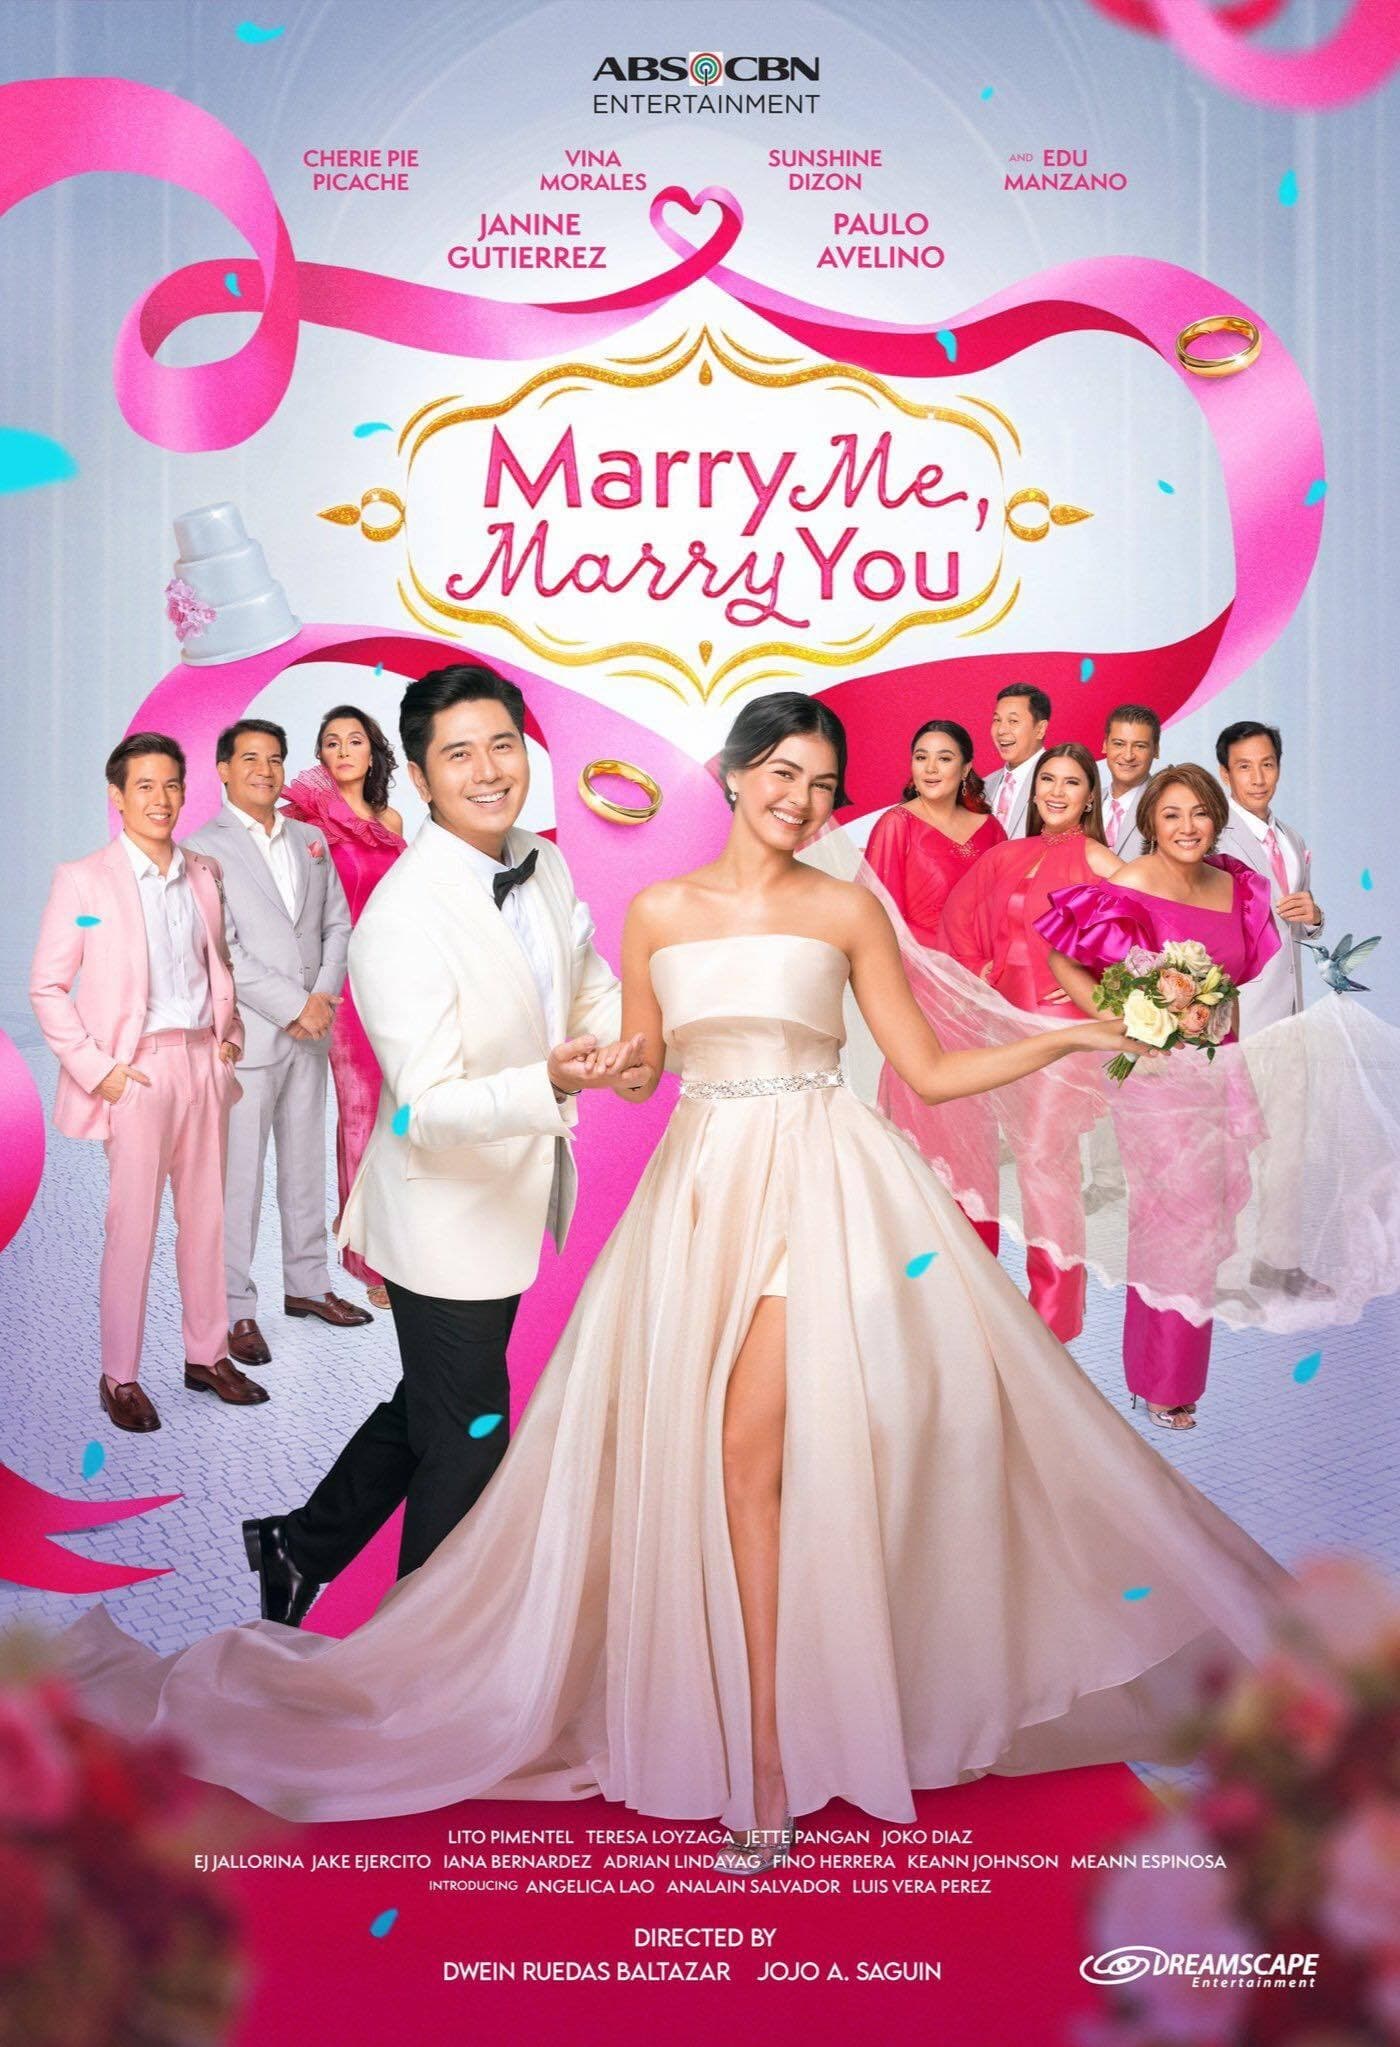 Marry Me, Marry You TV Shows About Family Relationships